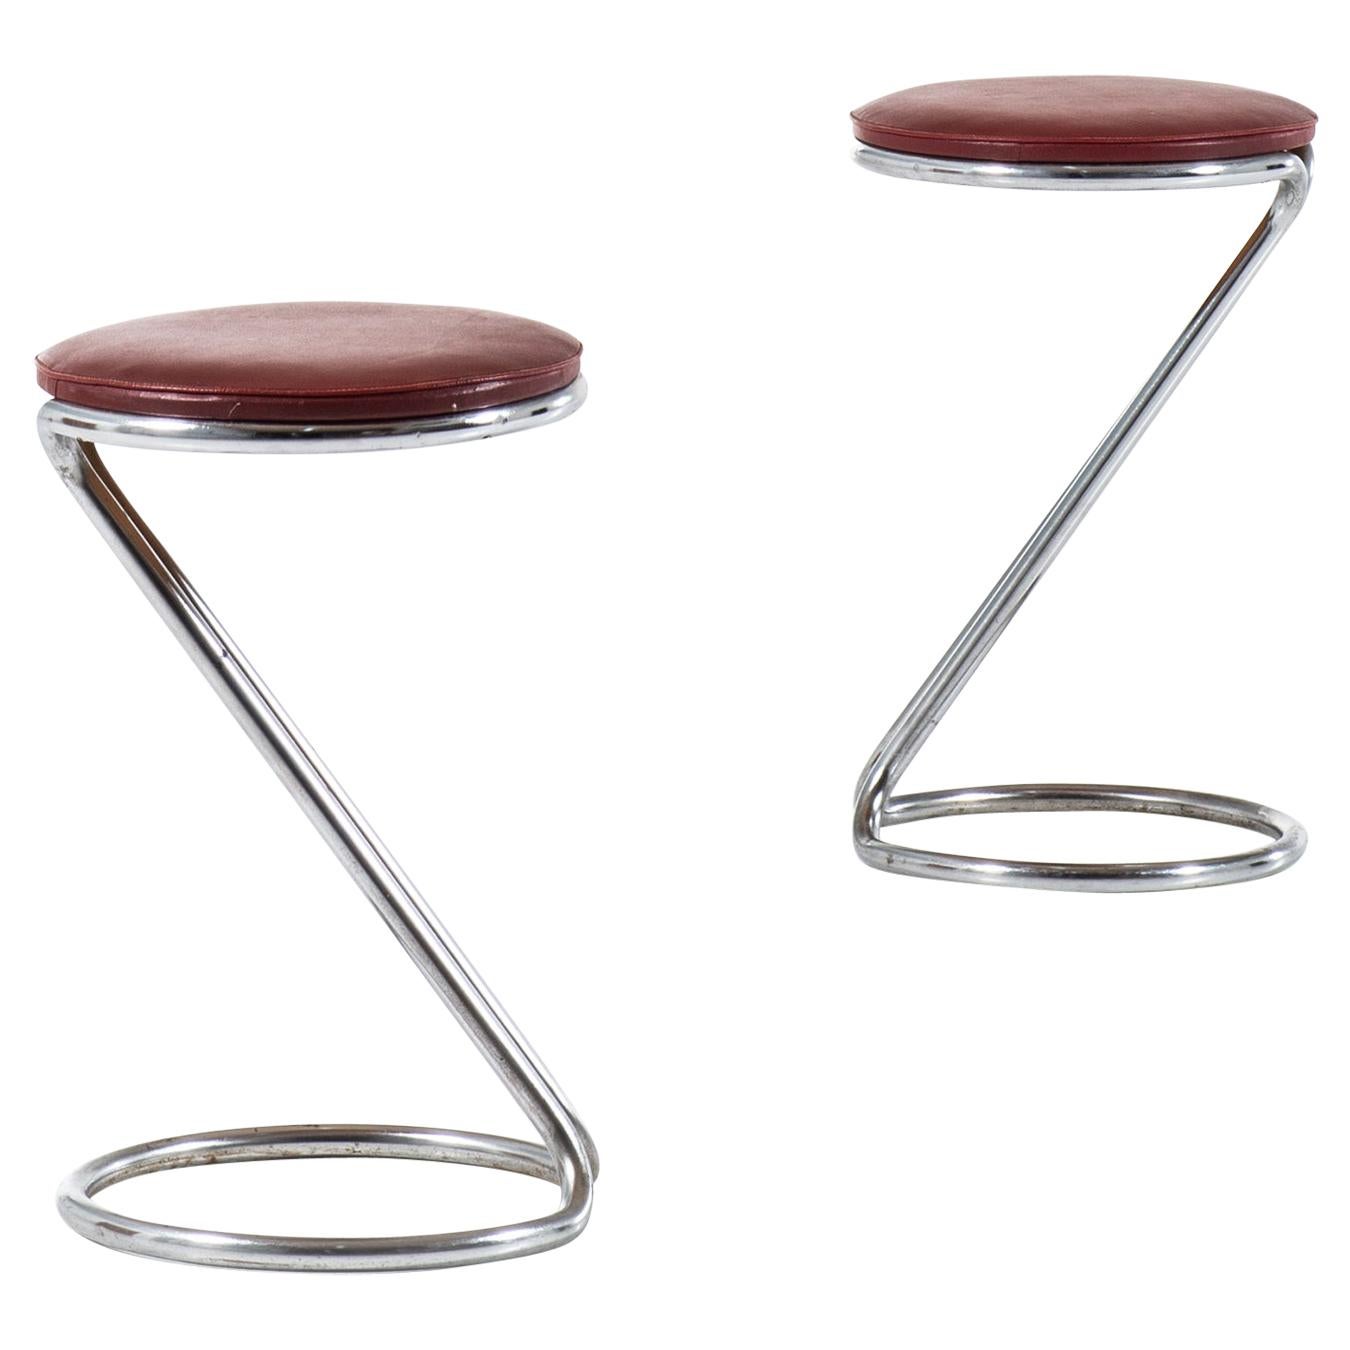 Pair of Stools in the Manner of Poul Henningsen Produced in Denmark